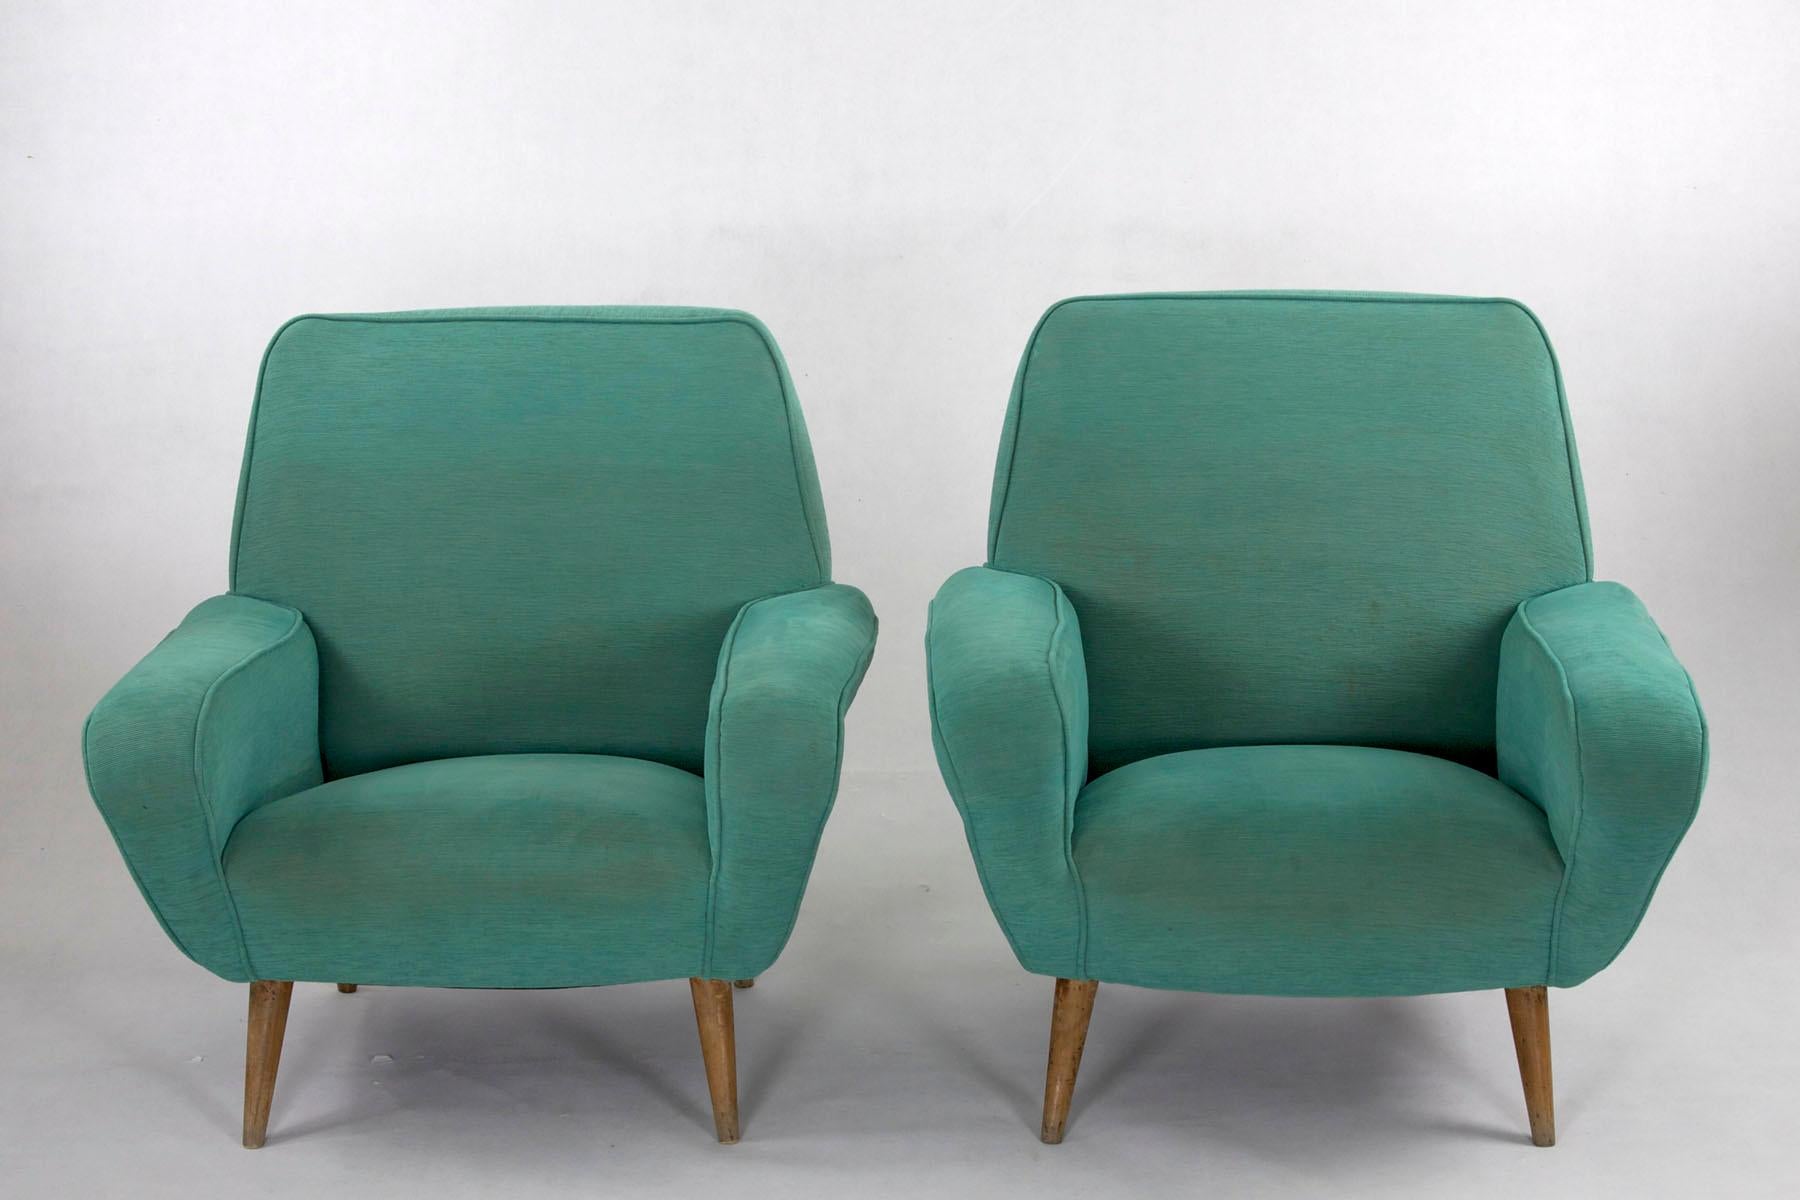 Set of 2 Gianfranco Frattini Chairs Modell 830, 1950s, Cassina, Italy For Sale 3